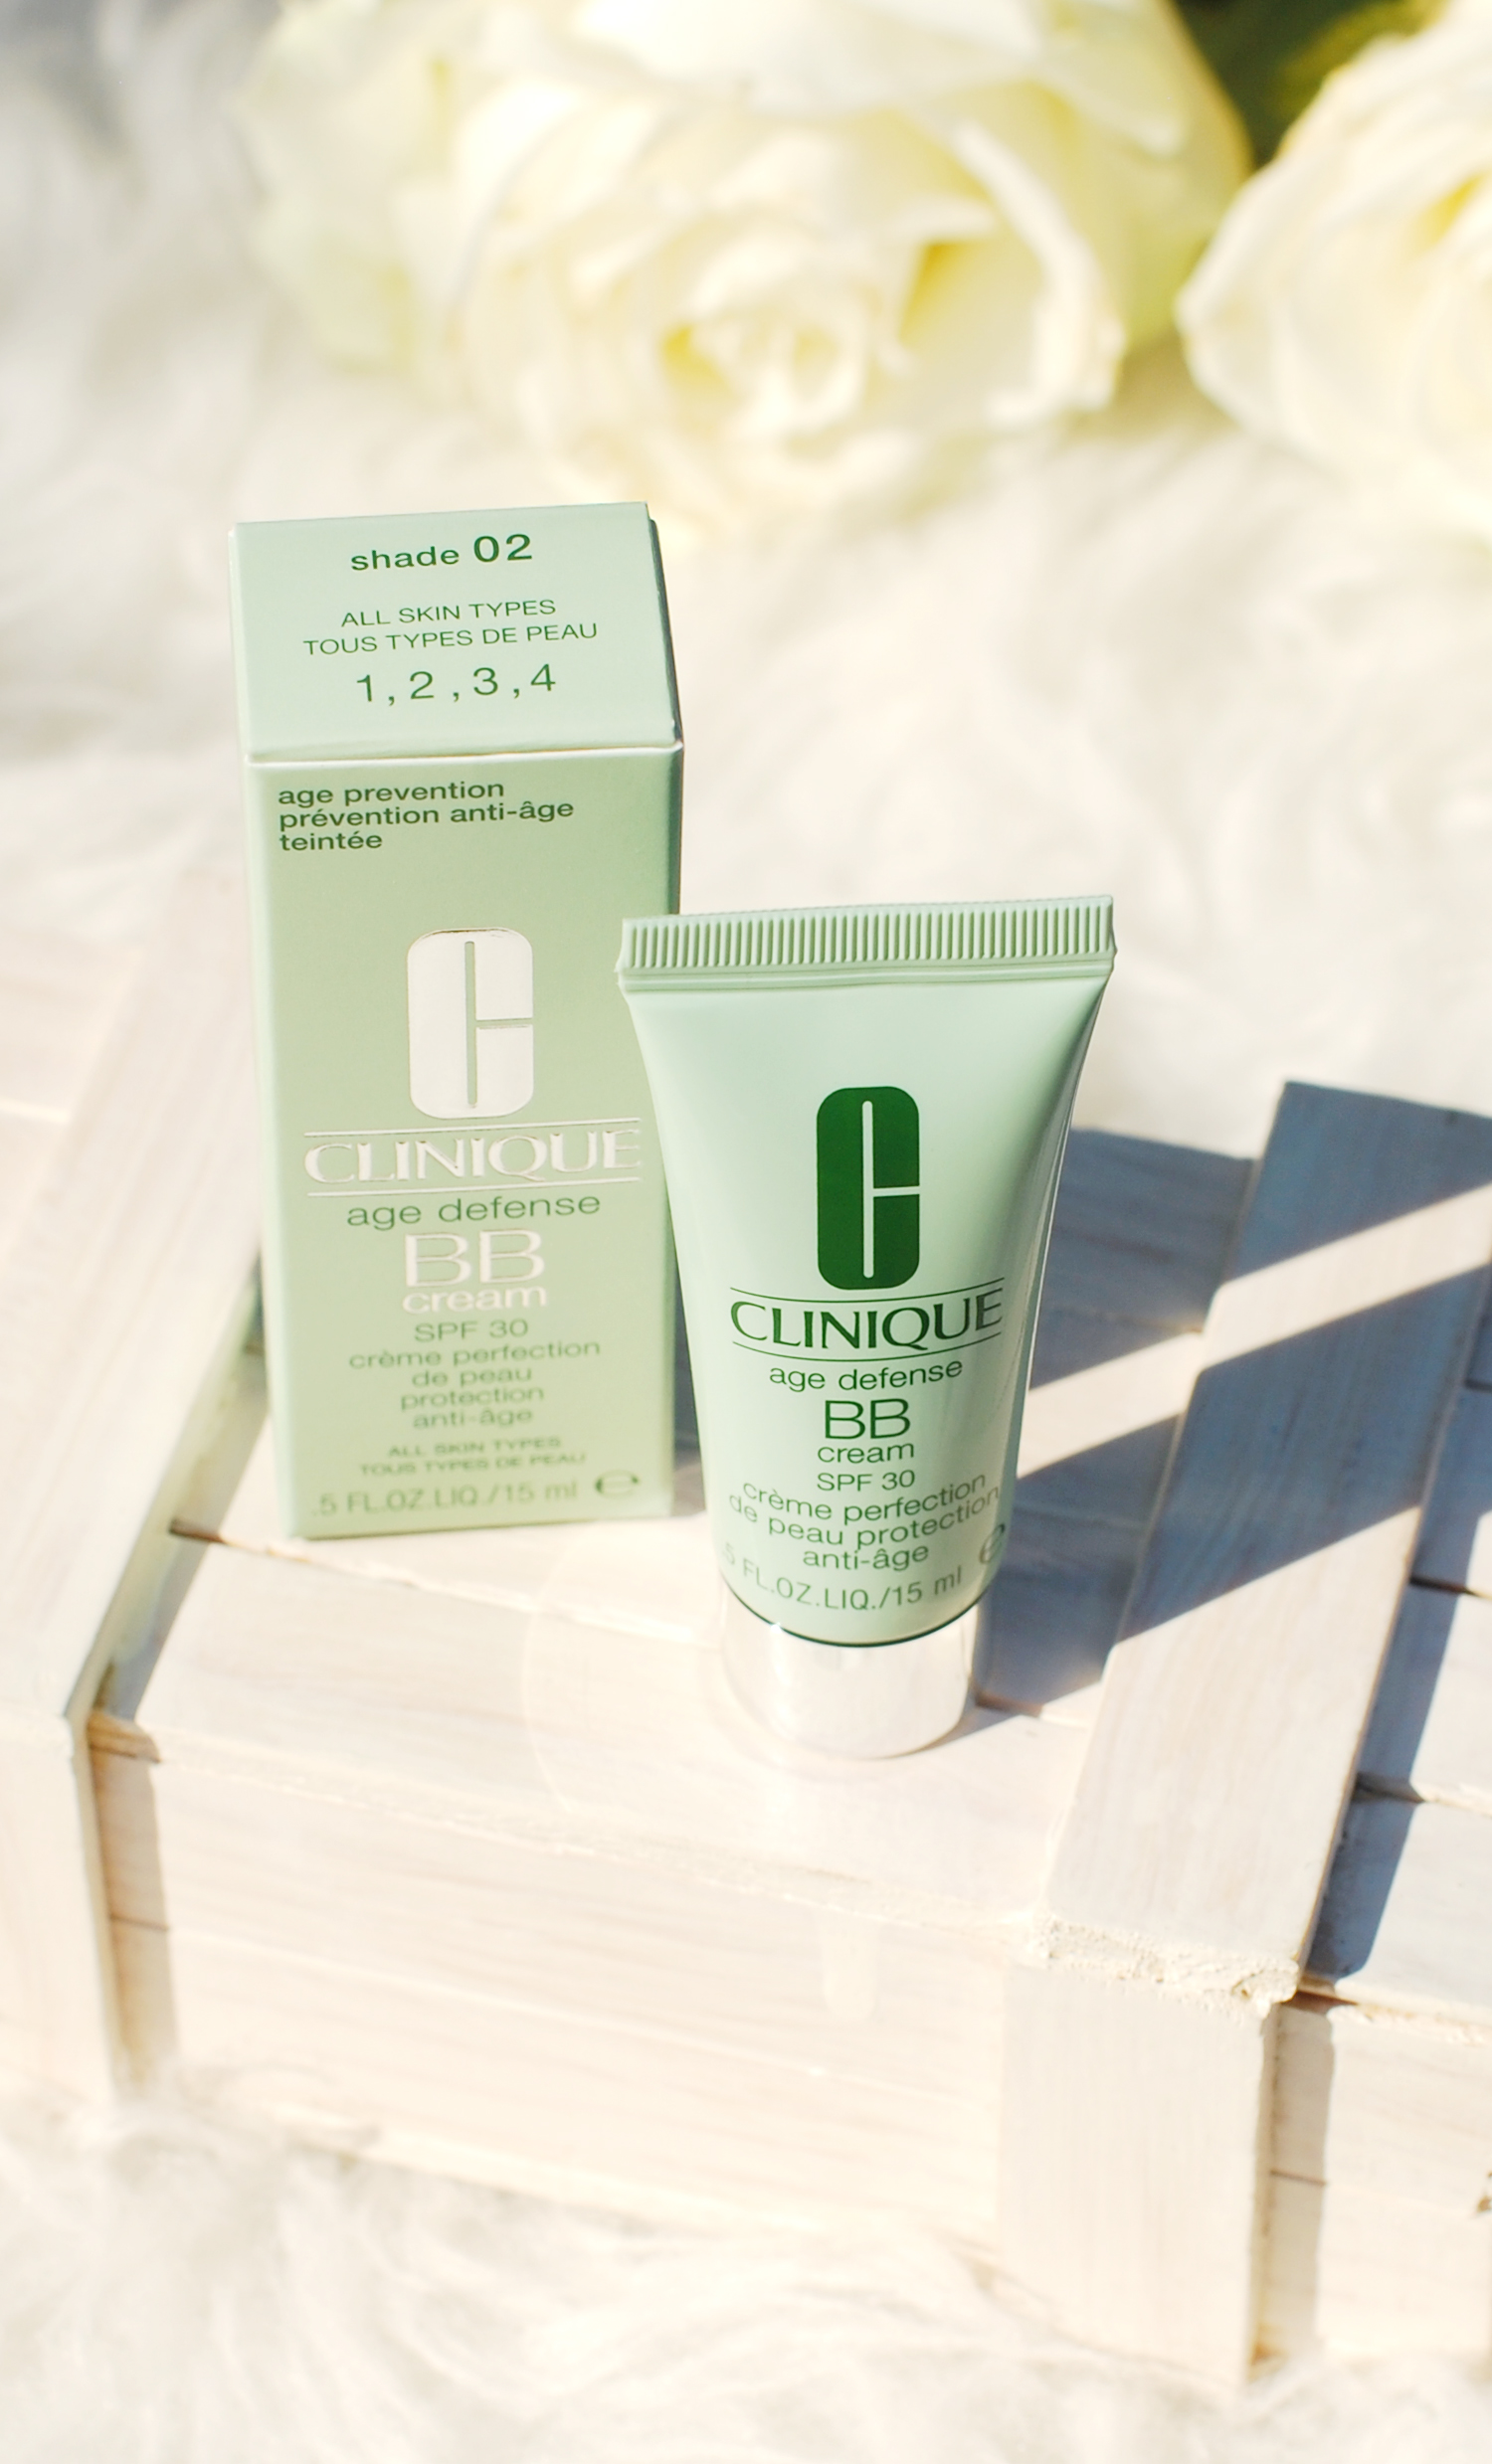 Clinique BB cream SPF30 review beauty shade 02 lifestyle by linda